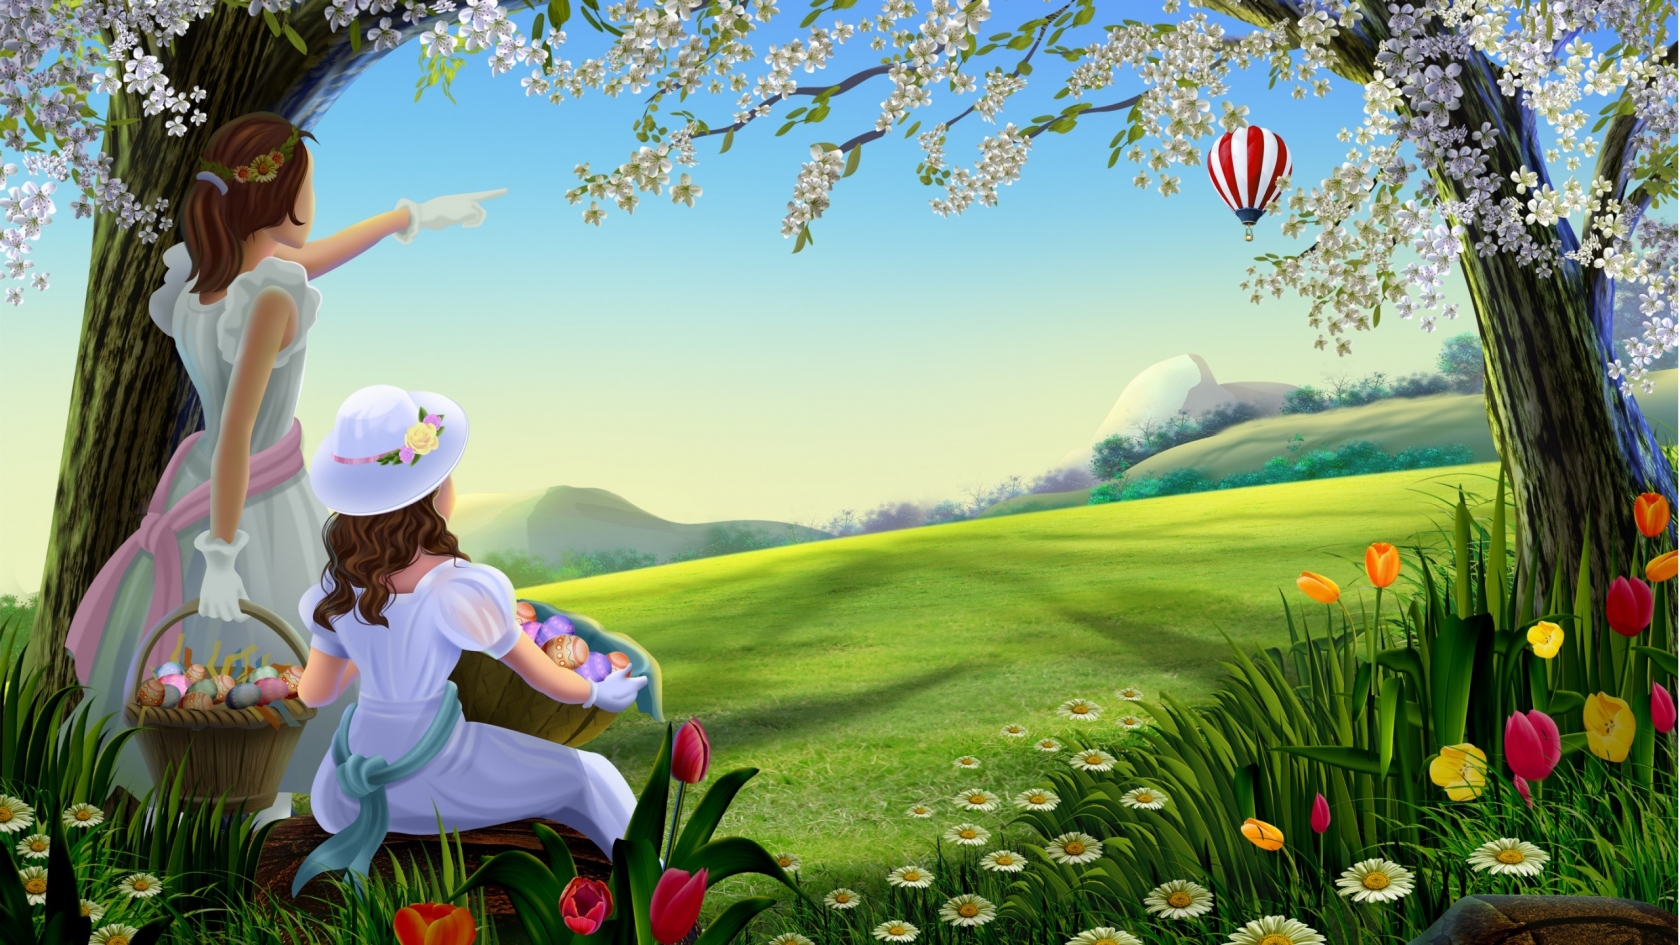 Amazing Spring Painting for 1680 x 945 HDTV resolution